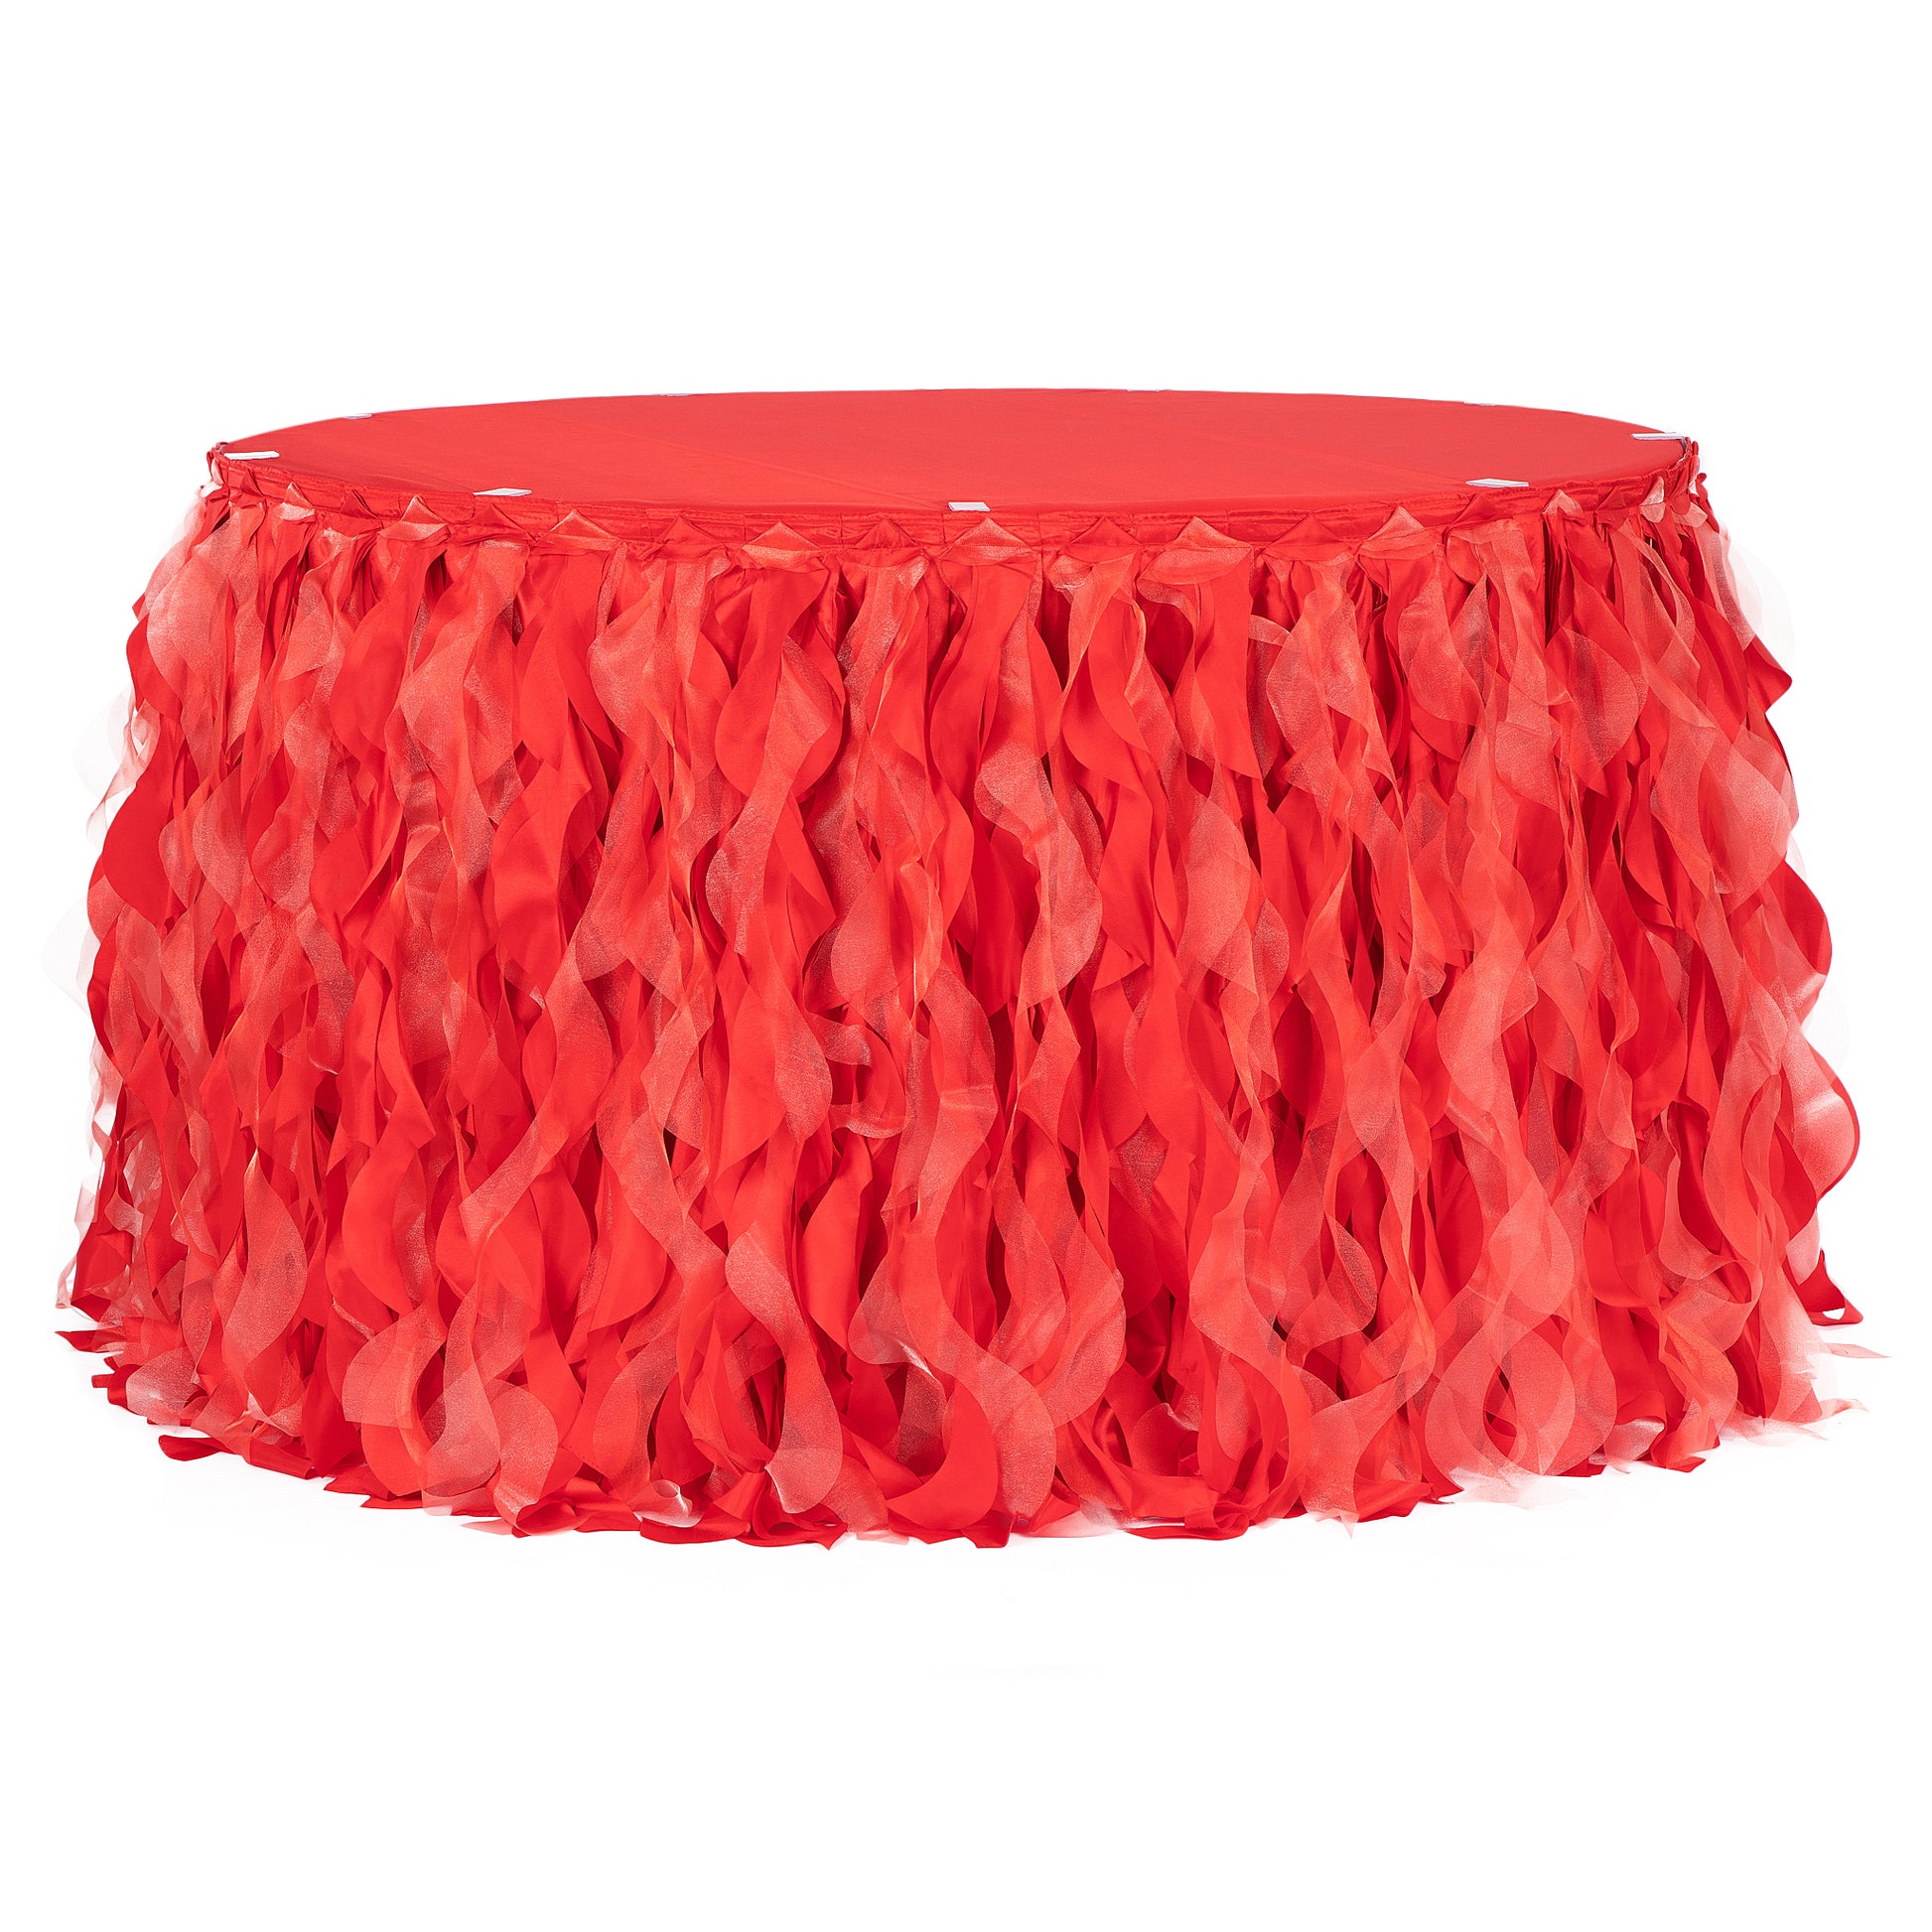 Curly Willow 14ft Table Skirt - Red - CV Linens